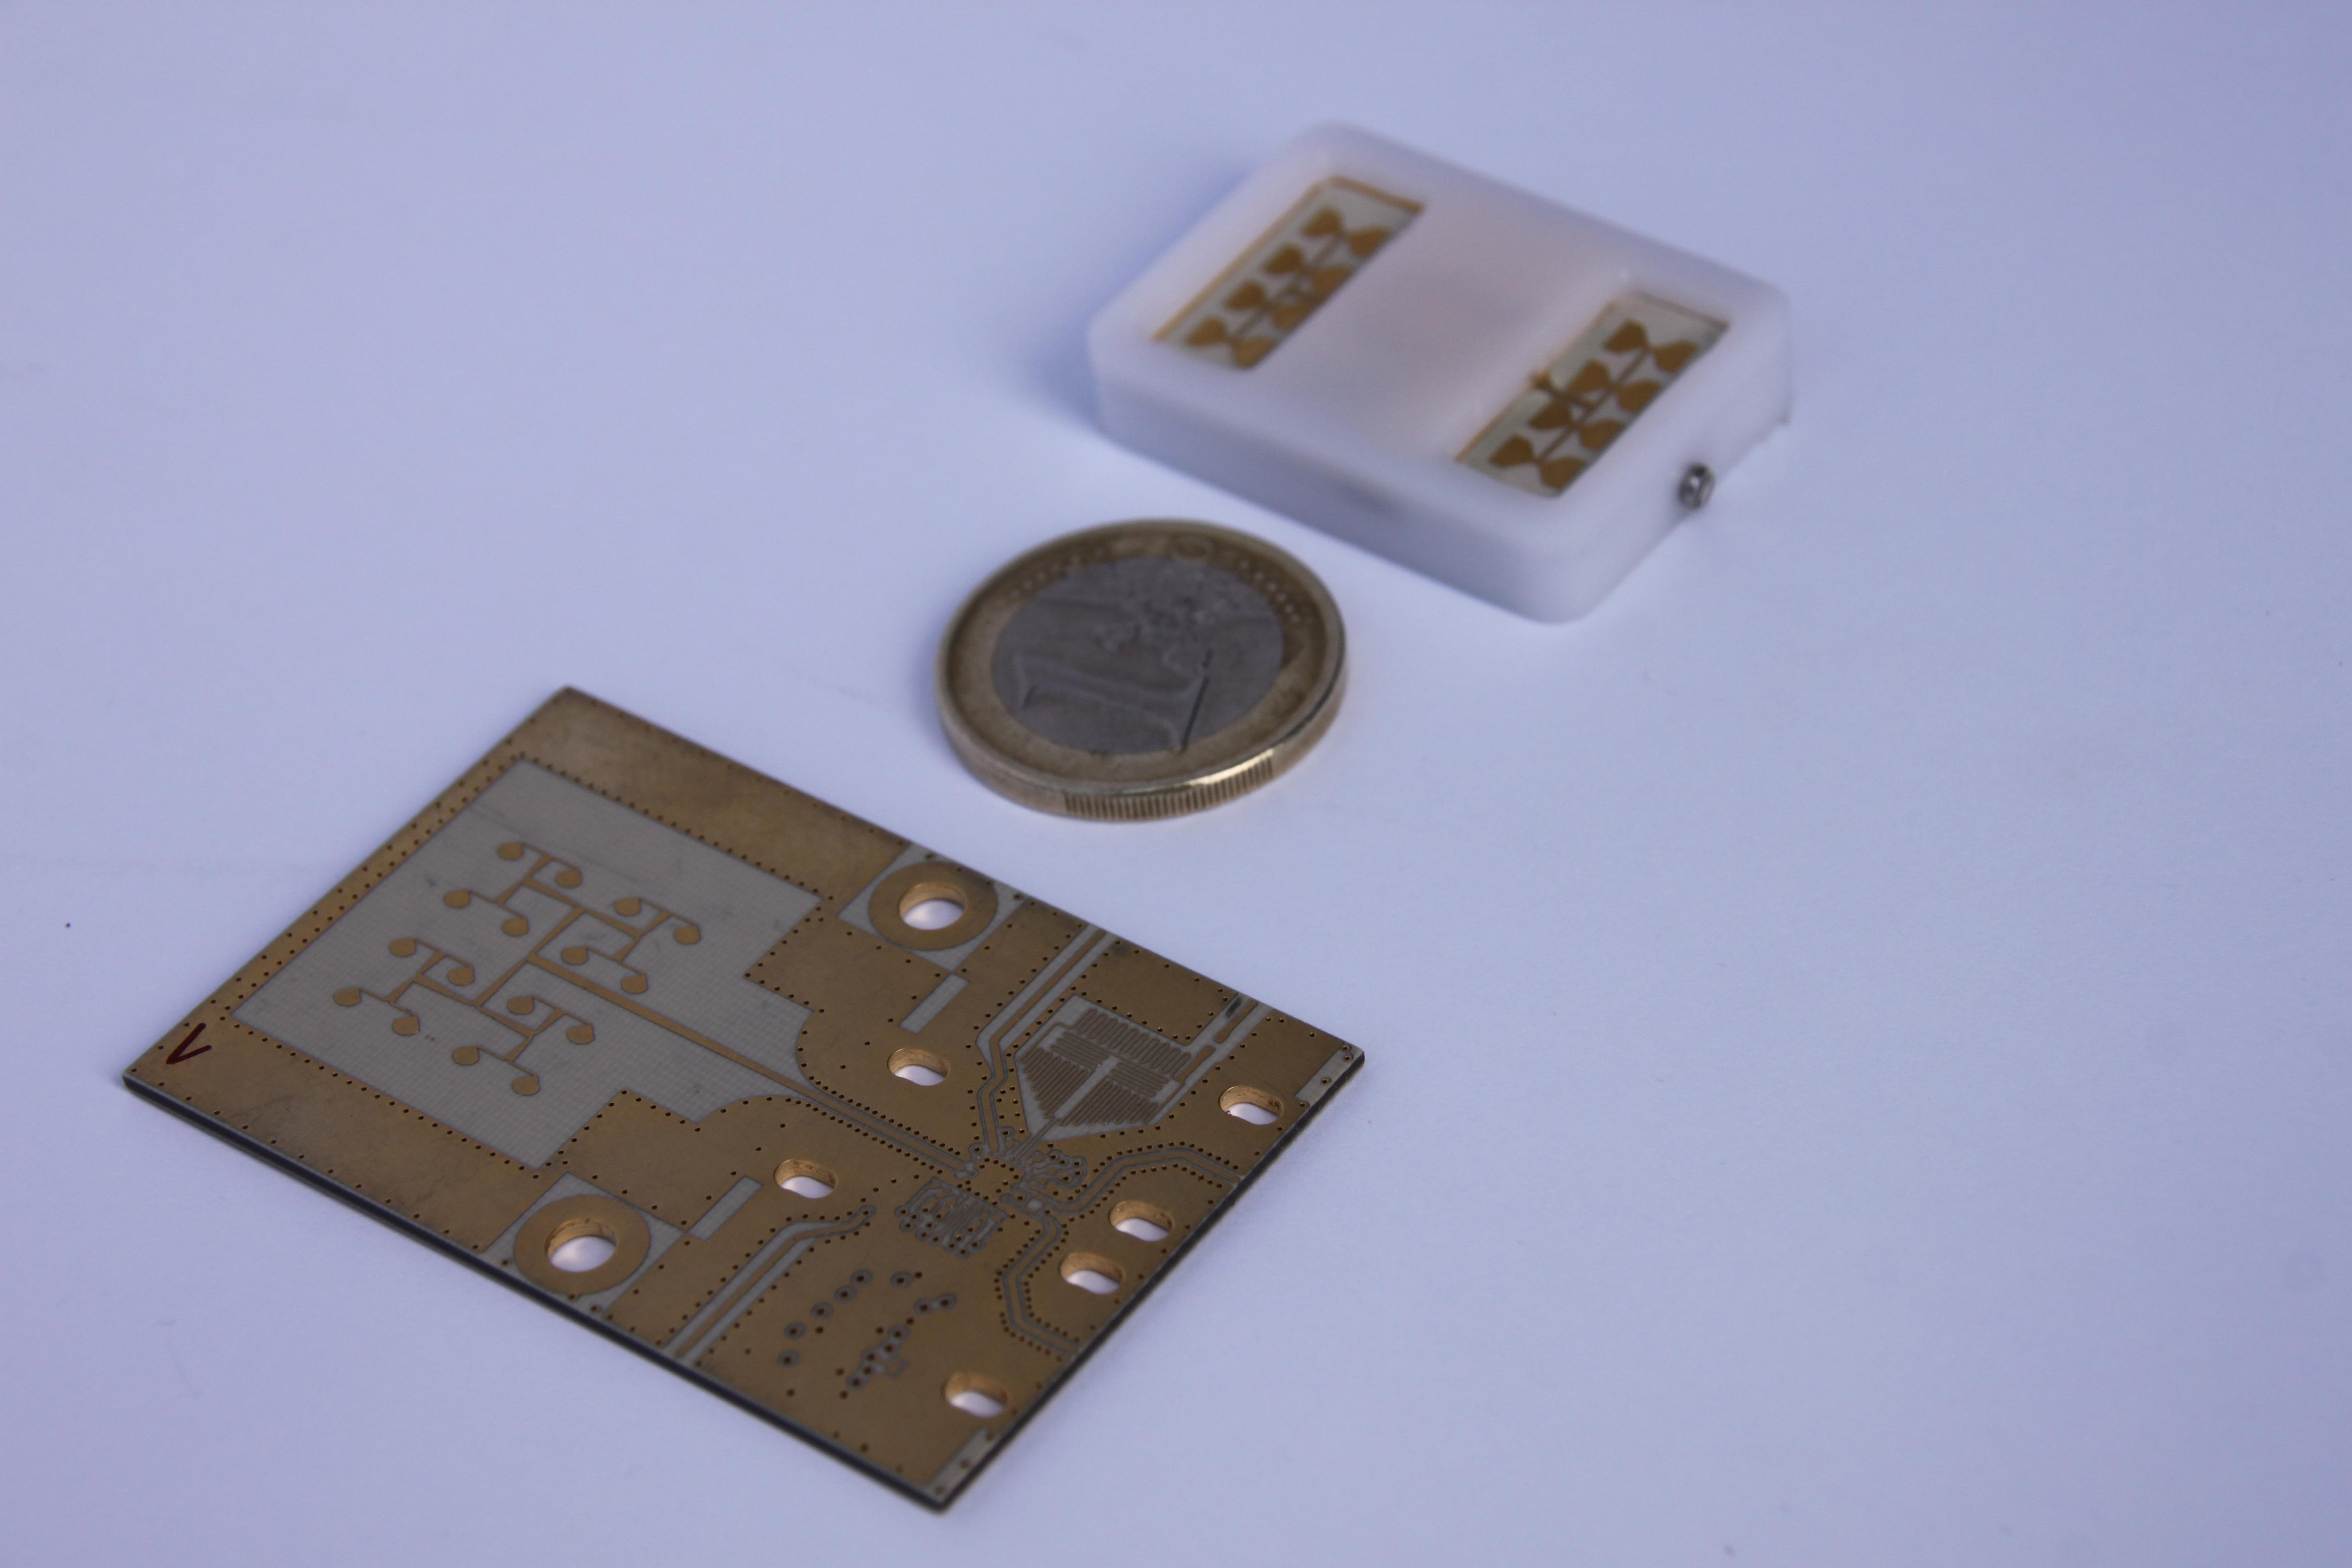 Test antenna systems integrated with NOVELIC Radar Test Chip at 60 GHz